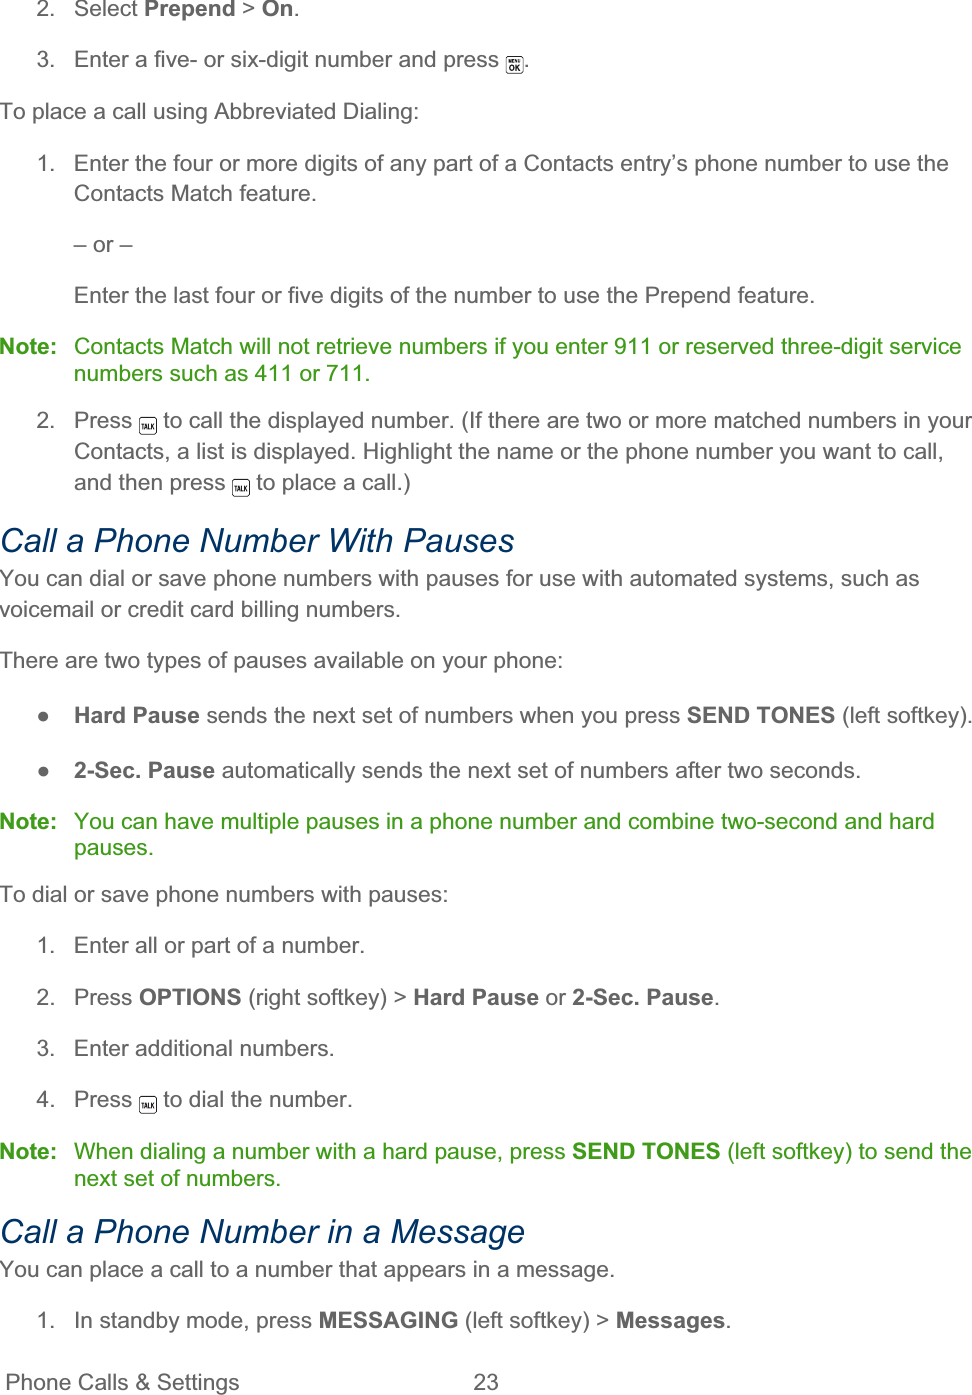 Phone Calls &amp; Settings  23   2. Select Prepend &gt; On.3.  Enter a five- or six-digit number and press  .To place a call using Abbreviated Dialing: 1.  Enter the four or more digits of any part of a Contacts entry’s phone number to use the Contacts Match feature. – or – Enter the last four or five digits of the number to use the Prepend feature. Note:  Contacts Match will not retrieve numbers if you enter 911 or reserved three-digit service numbers such as 411 or 711. 2. Press   to call the displayed number. (If there are two or more matched numbers in your Contacts, a list is displayed. Highlight the name or the phone number you want to call, and then press   to place a call.) Call a Phone Number With Pauses You can dial or save phone numbers with pauses for use with automated systems, such as voicemail or credit card billing numbers. There are two types of pauses available on your phone: ŏHard Pause sends the next set of numbers when you press SEND TONES (left softkey). ŏ2-Sec. Pause automatically sends the next set of numbers after two seconds. Note: You can have multiple pauses in a phone number and combine two-second and hard pauses.To dial or save phone numbers with pauses: 1.  Enter all or part of a number. 2. Press OPTIONS (right softkey) &gt; Hard Pause or 2-Sec. Pause.3.  Enter additional numbers. 4. Press   to dial the number. Note: When dialing a number with a hard pause, press SEND TONES (left softkey) to send the next set of numbers.Call a Phone Number in a Message You can place a call to a number that appears in a message. 1.  In standby mode, press MESSAGING (left softkey) &gt; Messages.